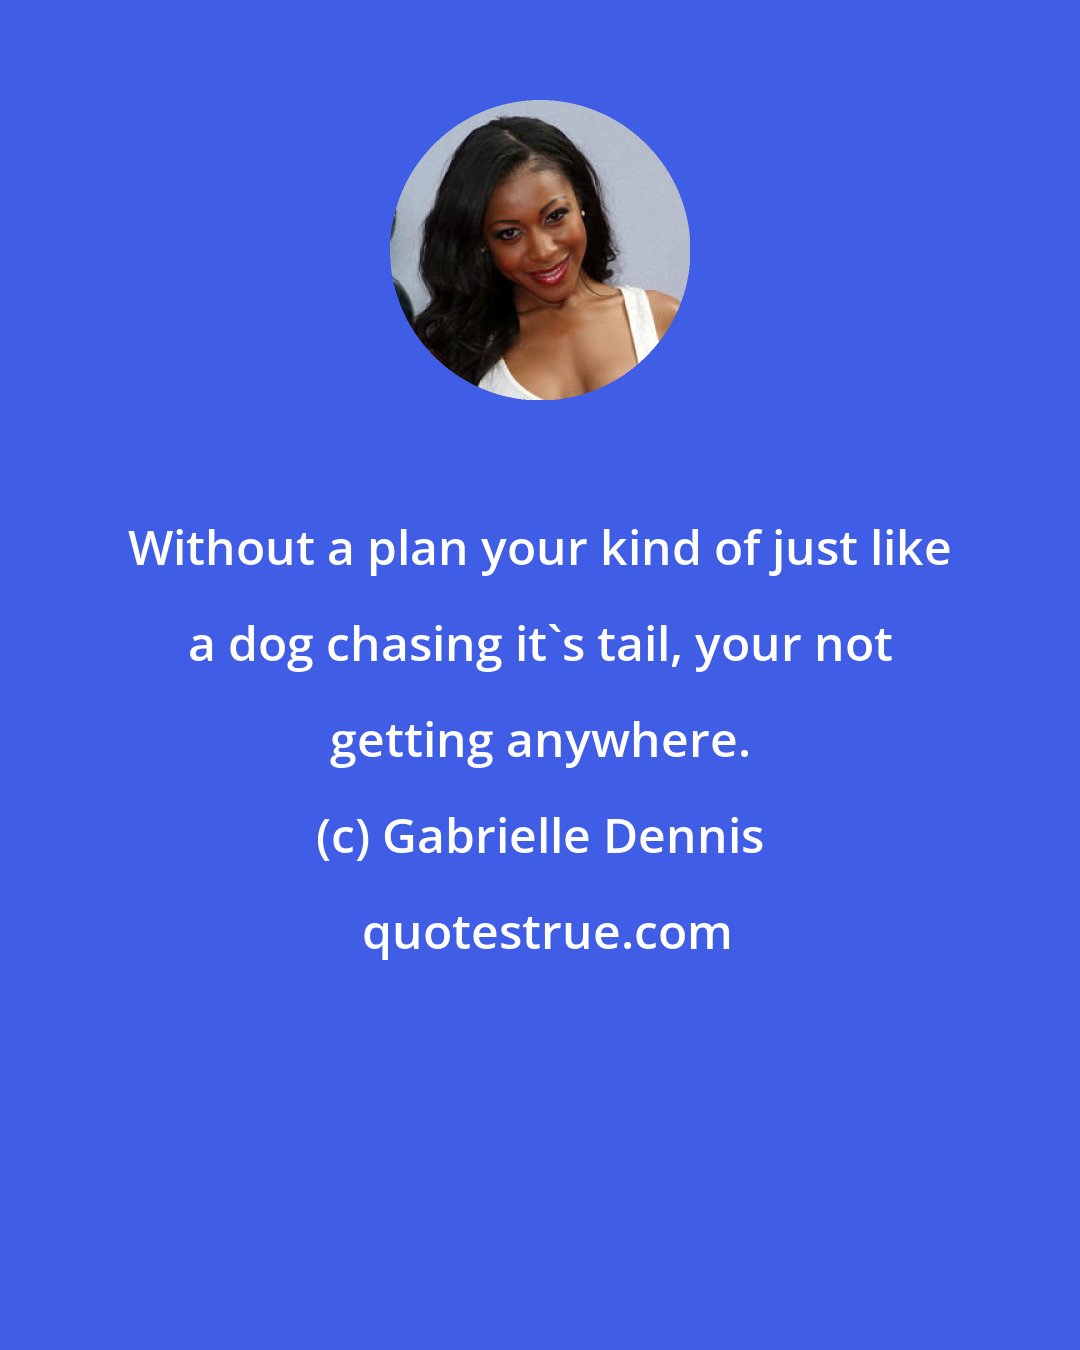 Gabrielle Dennis: Without a plan your kind of just like a dog chasing it's tail, your not getting anywhere.